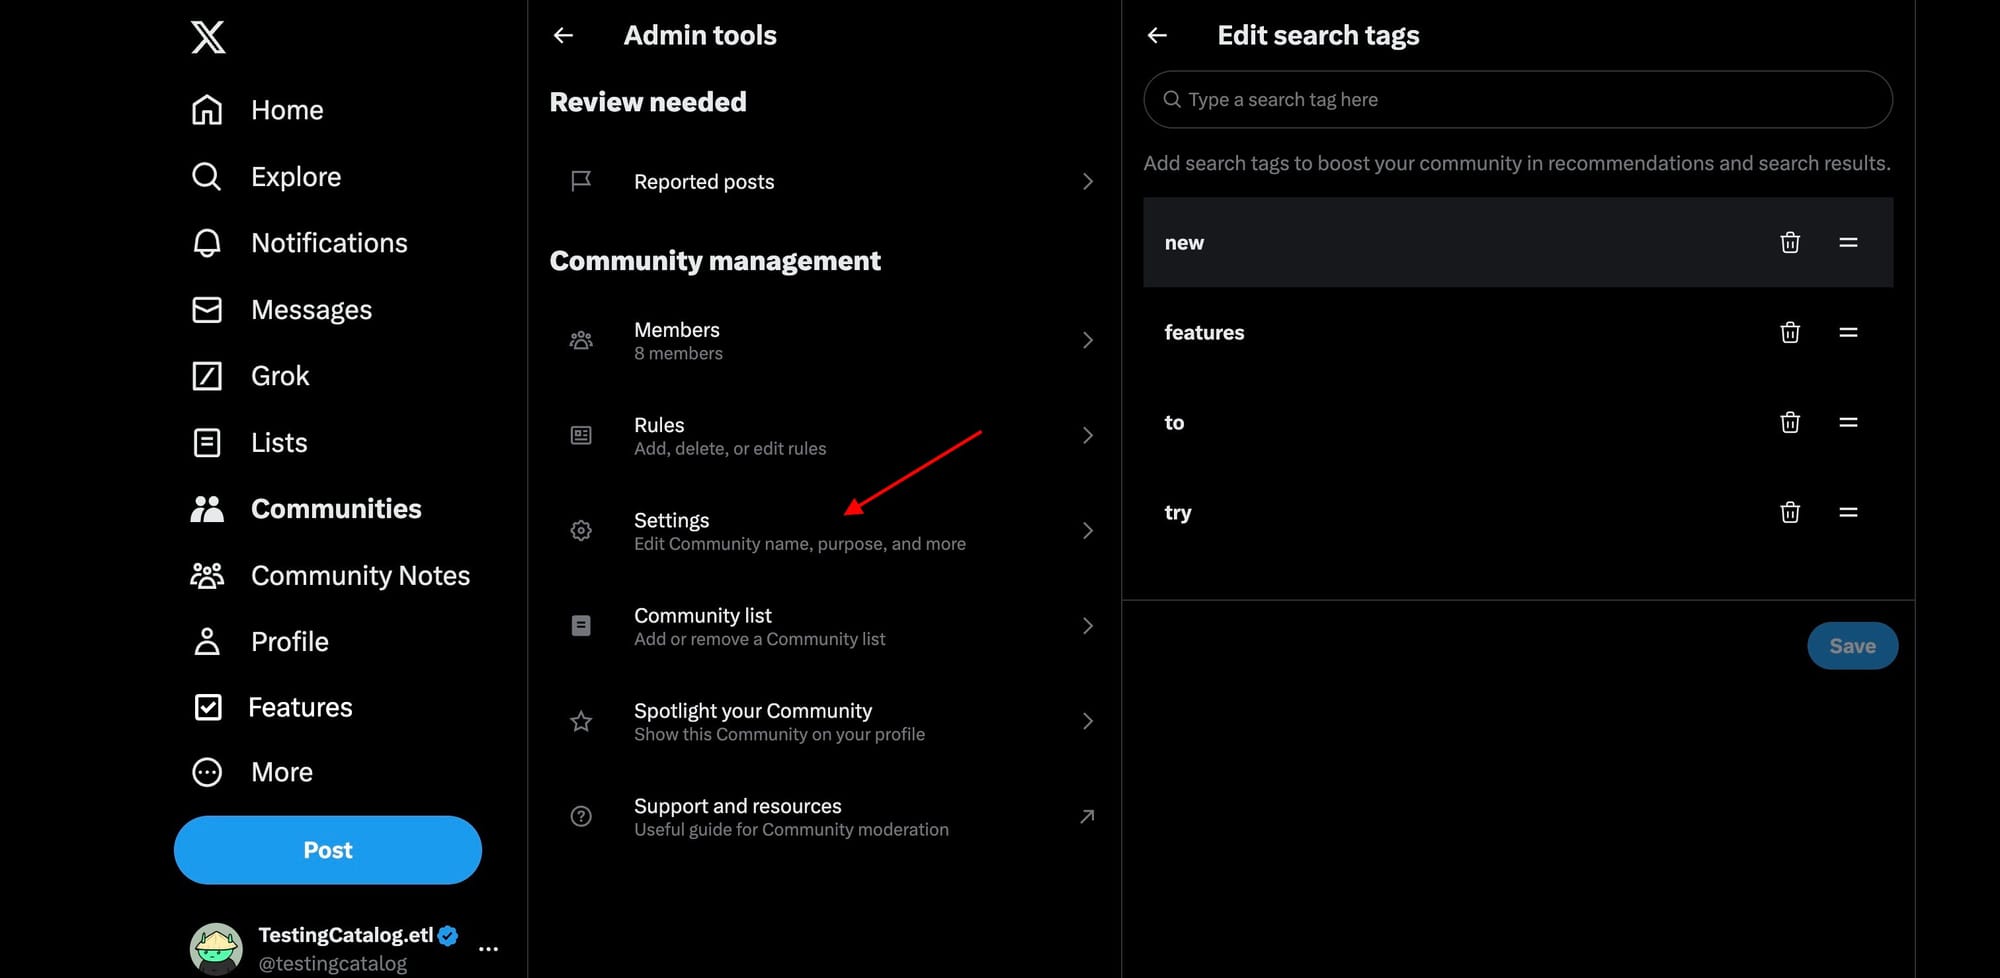 Now you can set search tags for X communities on the web